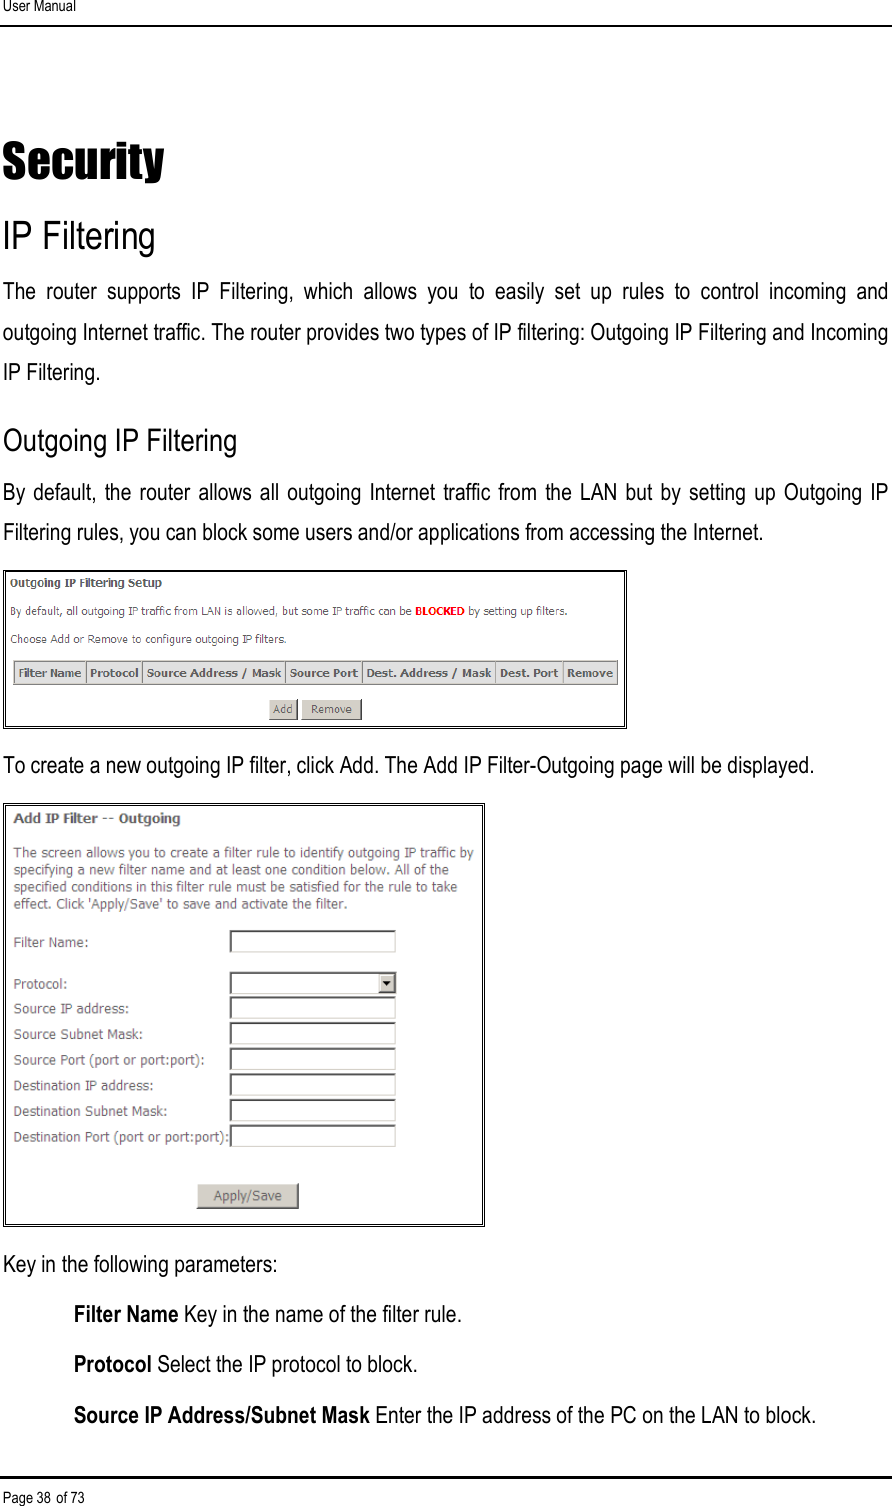 User Manual Page 38 of 73 Security IP Filtering The  router  supports  IP  Filtering,  which  allows  you  to  easily  set  up  rules  to  control  incoming  and outgoing Internet traffic. The router provides two types of IP filtering: Outgoing IP Filtering and Incoming IP Filtering. Outgoing IP Filtering By default, the  router allows  all outgoing Internet traffic from the  LAN but by setting  up Outgoing  IP Filtering rules, you can block some users and/or applications from accessing the Internet.  To create a new outgoing IP filter, click Add. The Add IP Filter-Outgoing page will be displayed.  Key in the following parameters: Filter Name Key in the name of the filter rule. Protocol Select the IP protocol to block. Source IP Address/Subnet Mask Enter the IP address of the PC on the LAN to block. 